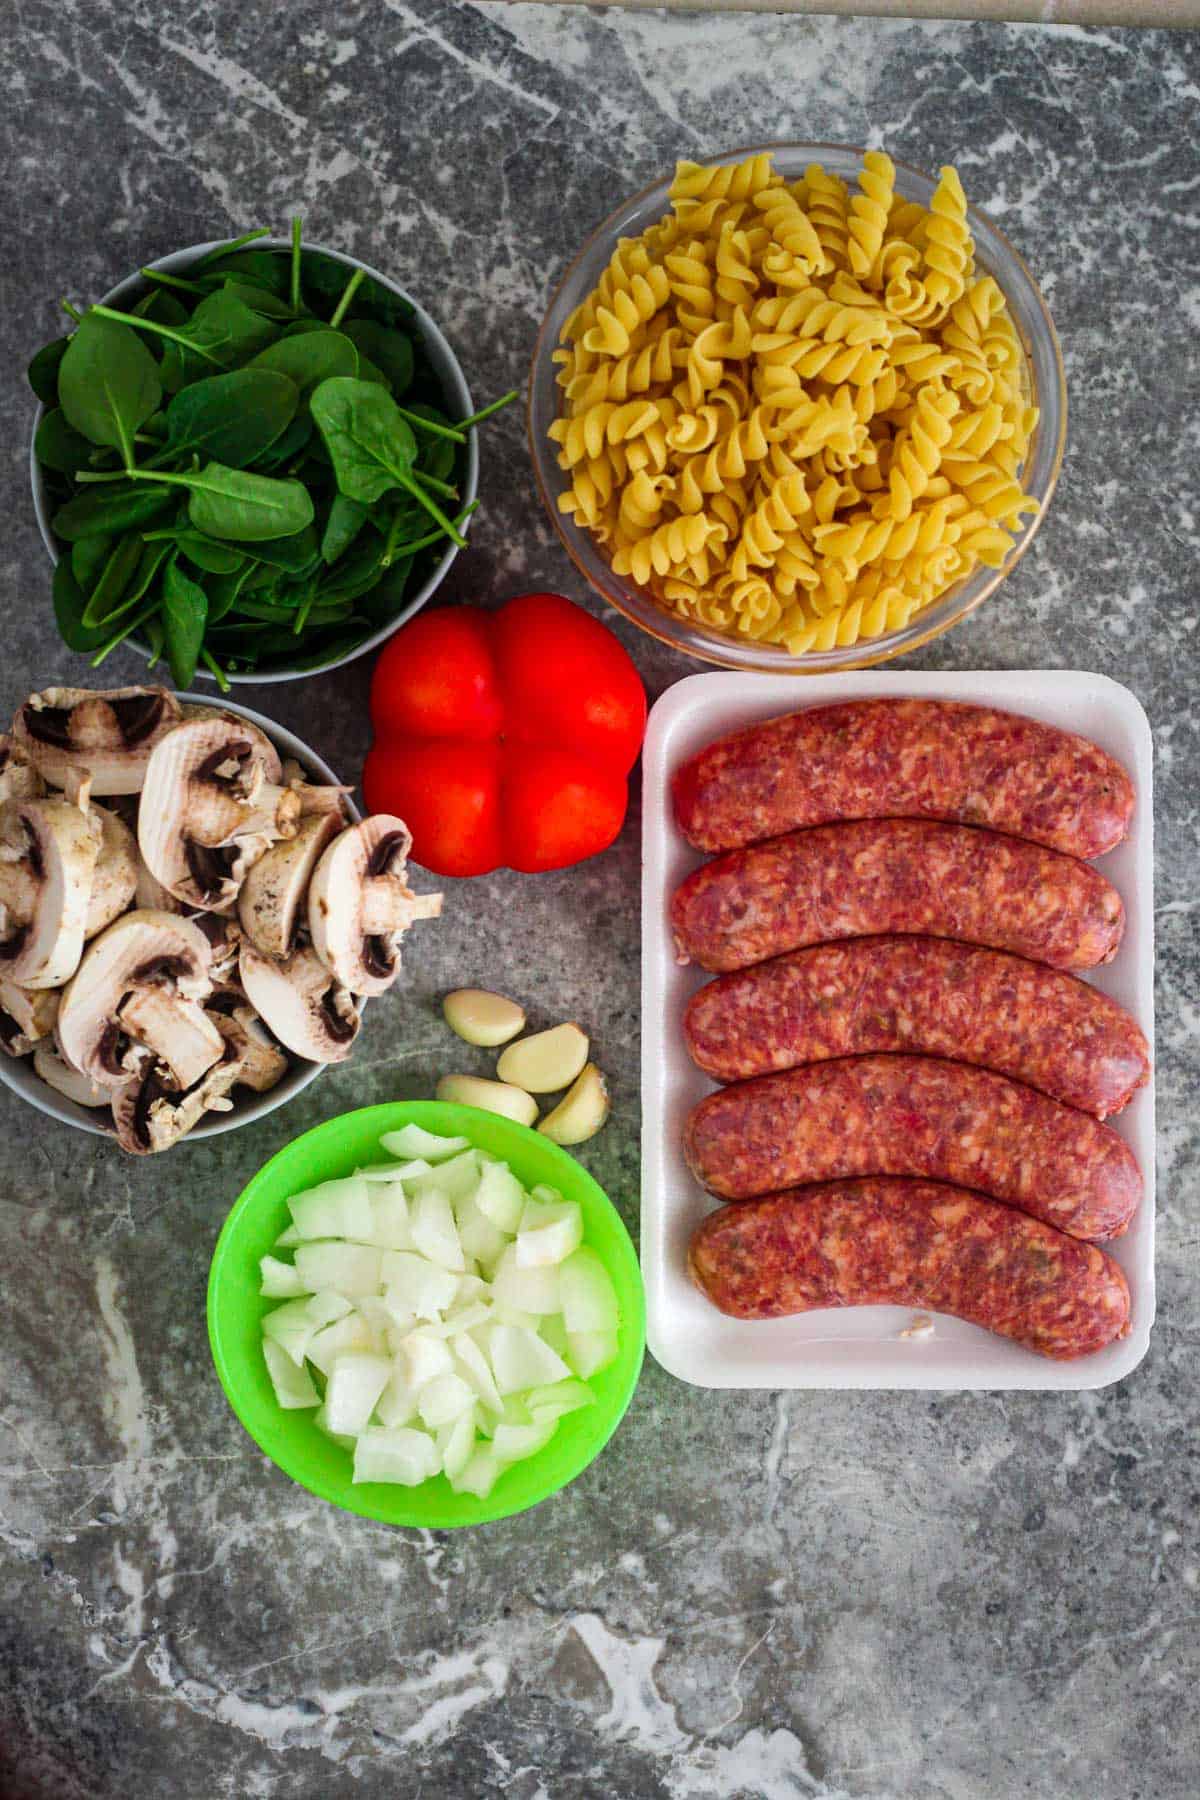 Ingredients for Fusilli pasta with sausages dinner - spinach, fusilli, red bell pepper, mushrooms, garlic, sausages, onion.